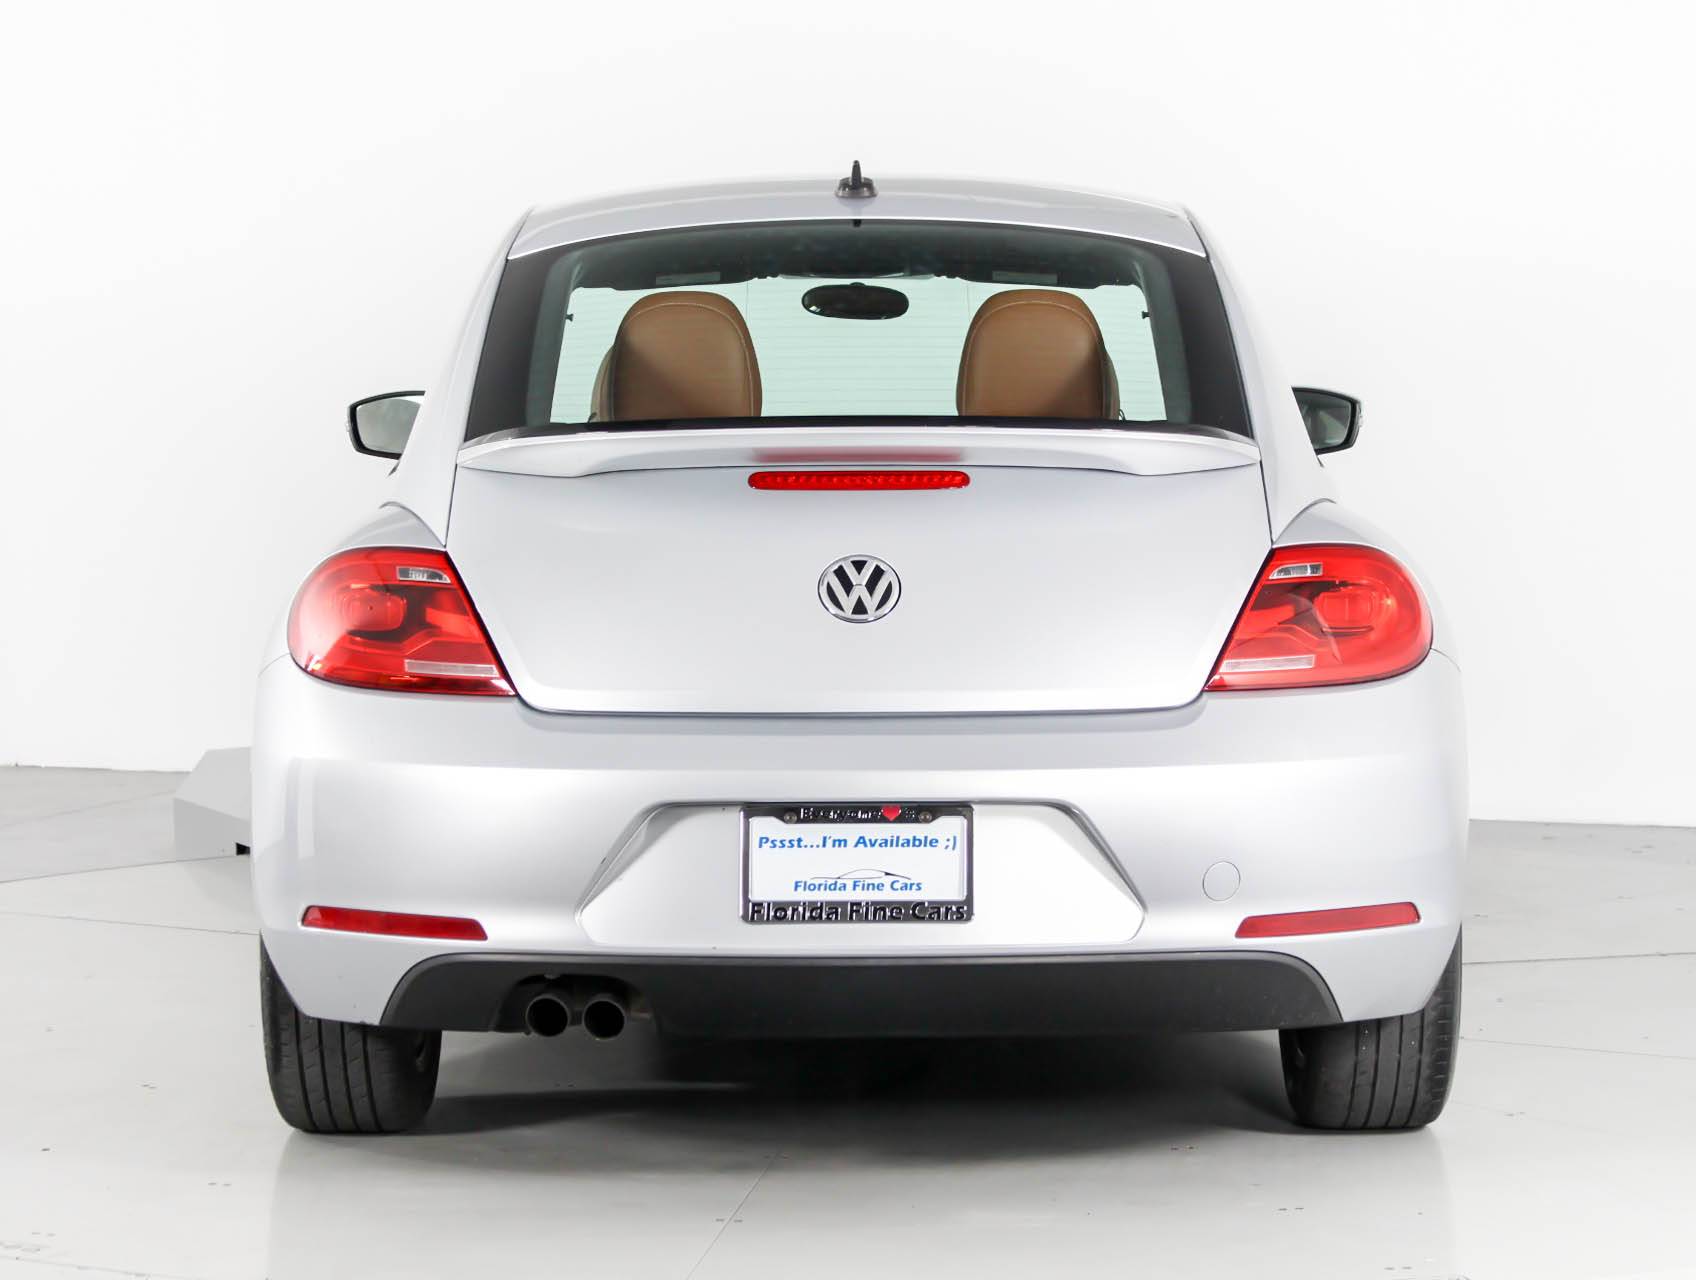 Florida Fine Cars - Used VOLKSWAGEN BEETLE 2015 WEST PALM 1.8t Classic